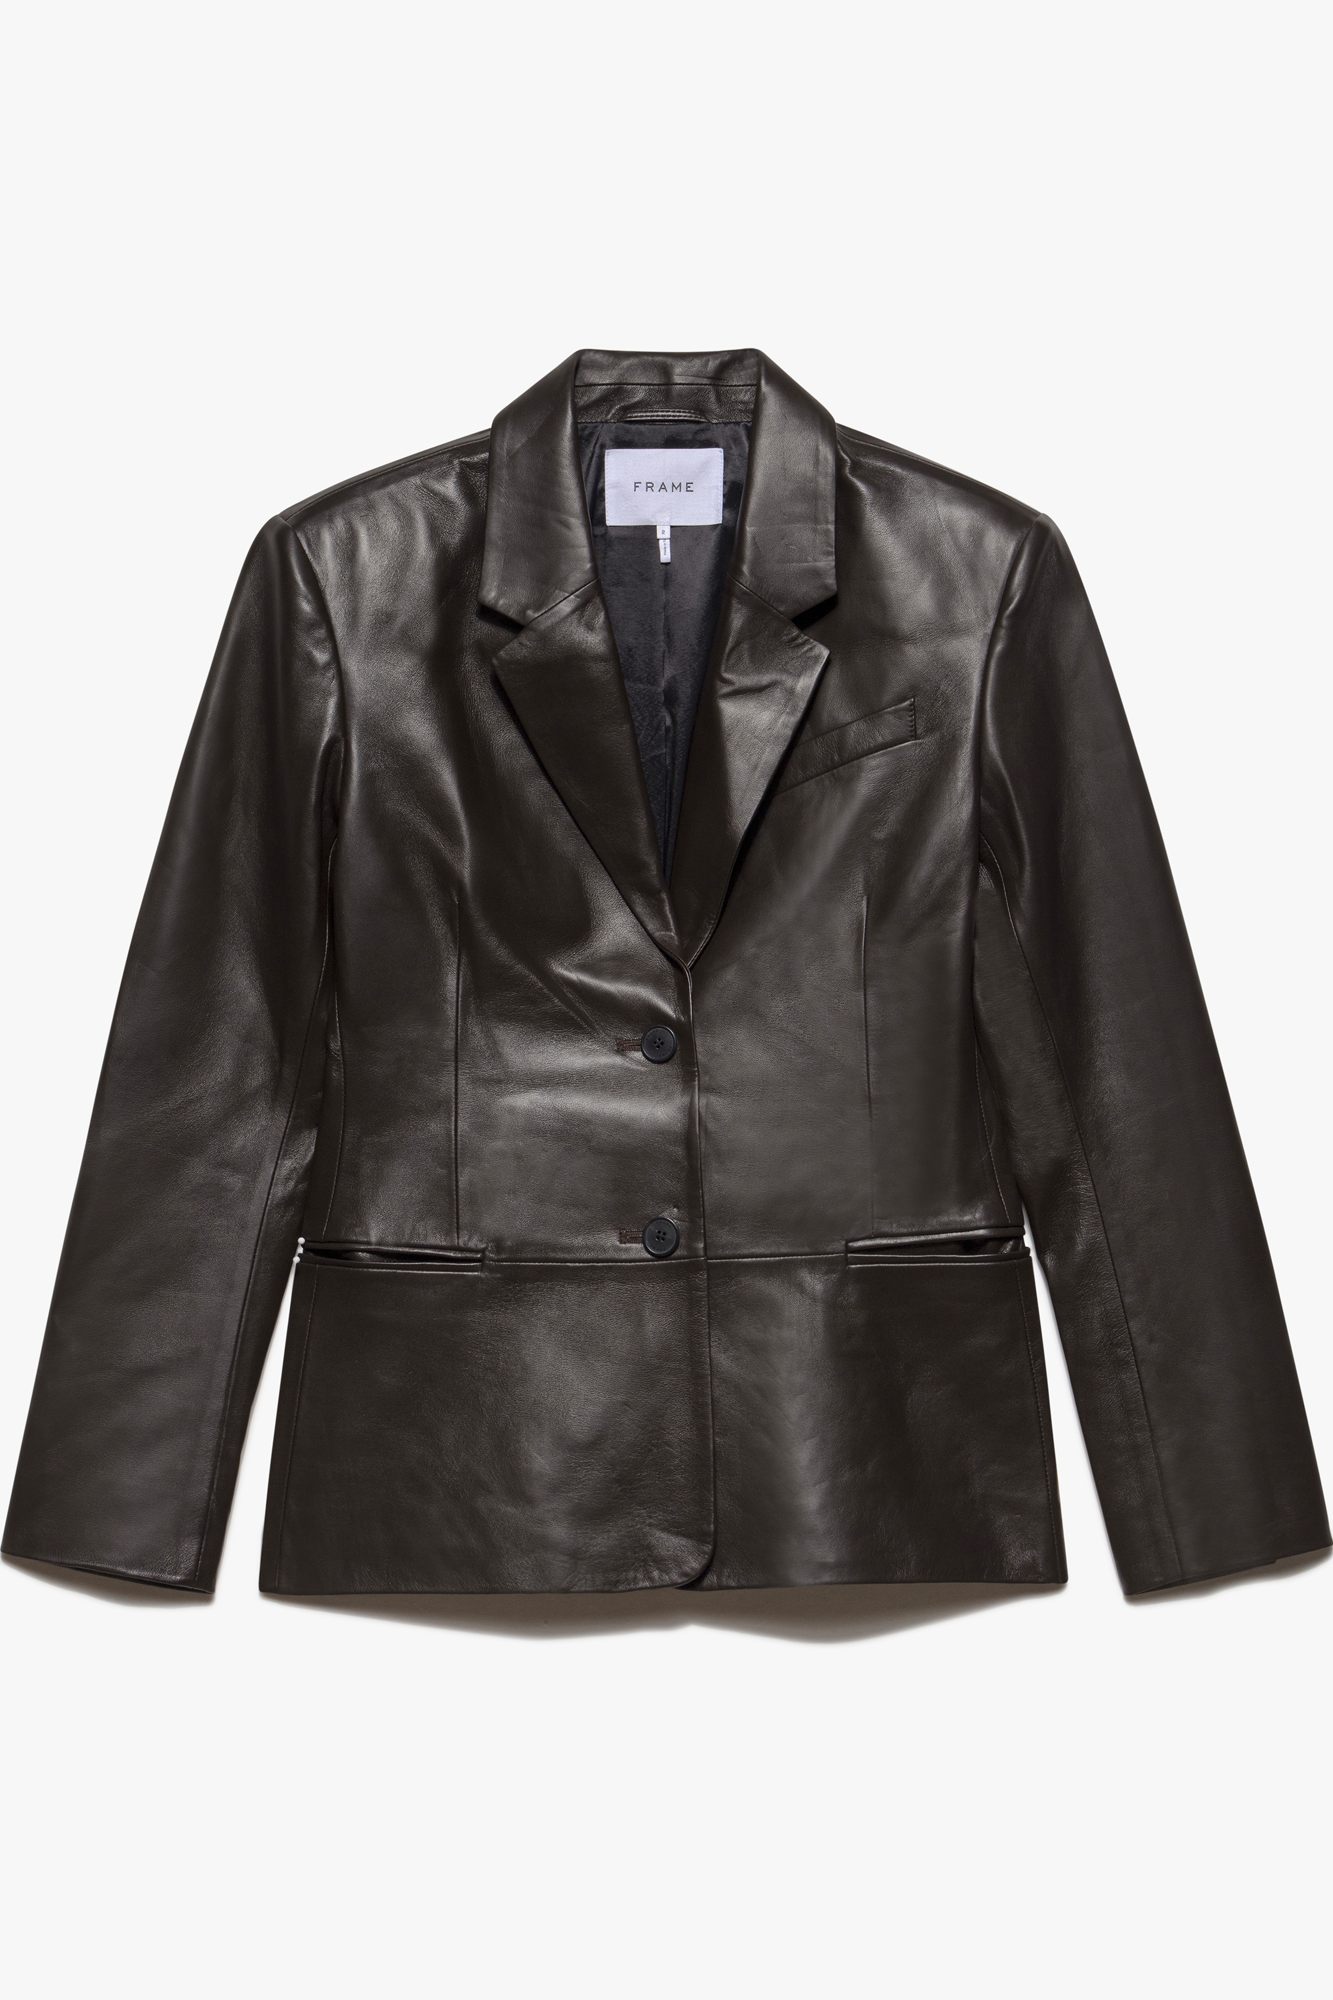 The Femme Leather Blazer from Frame is a best-selling classic blazer made of 100% lamb leather. With a tailored silhouette, double-button closure and wide lapels, this blazer enhances your look with a professional yet stylish feel. Whether you're dressing up for the boardroom or your next big event, this blazer is the perfect choice.